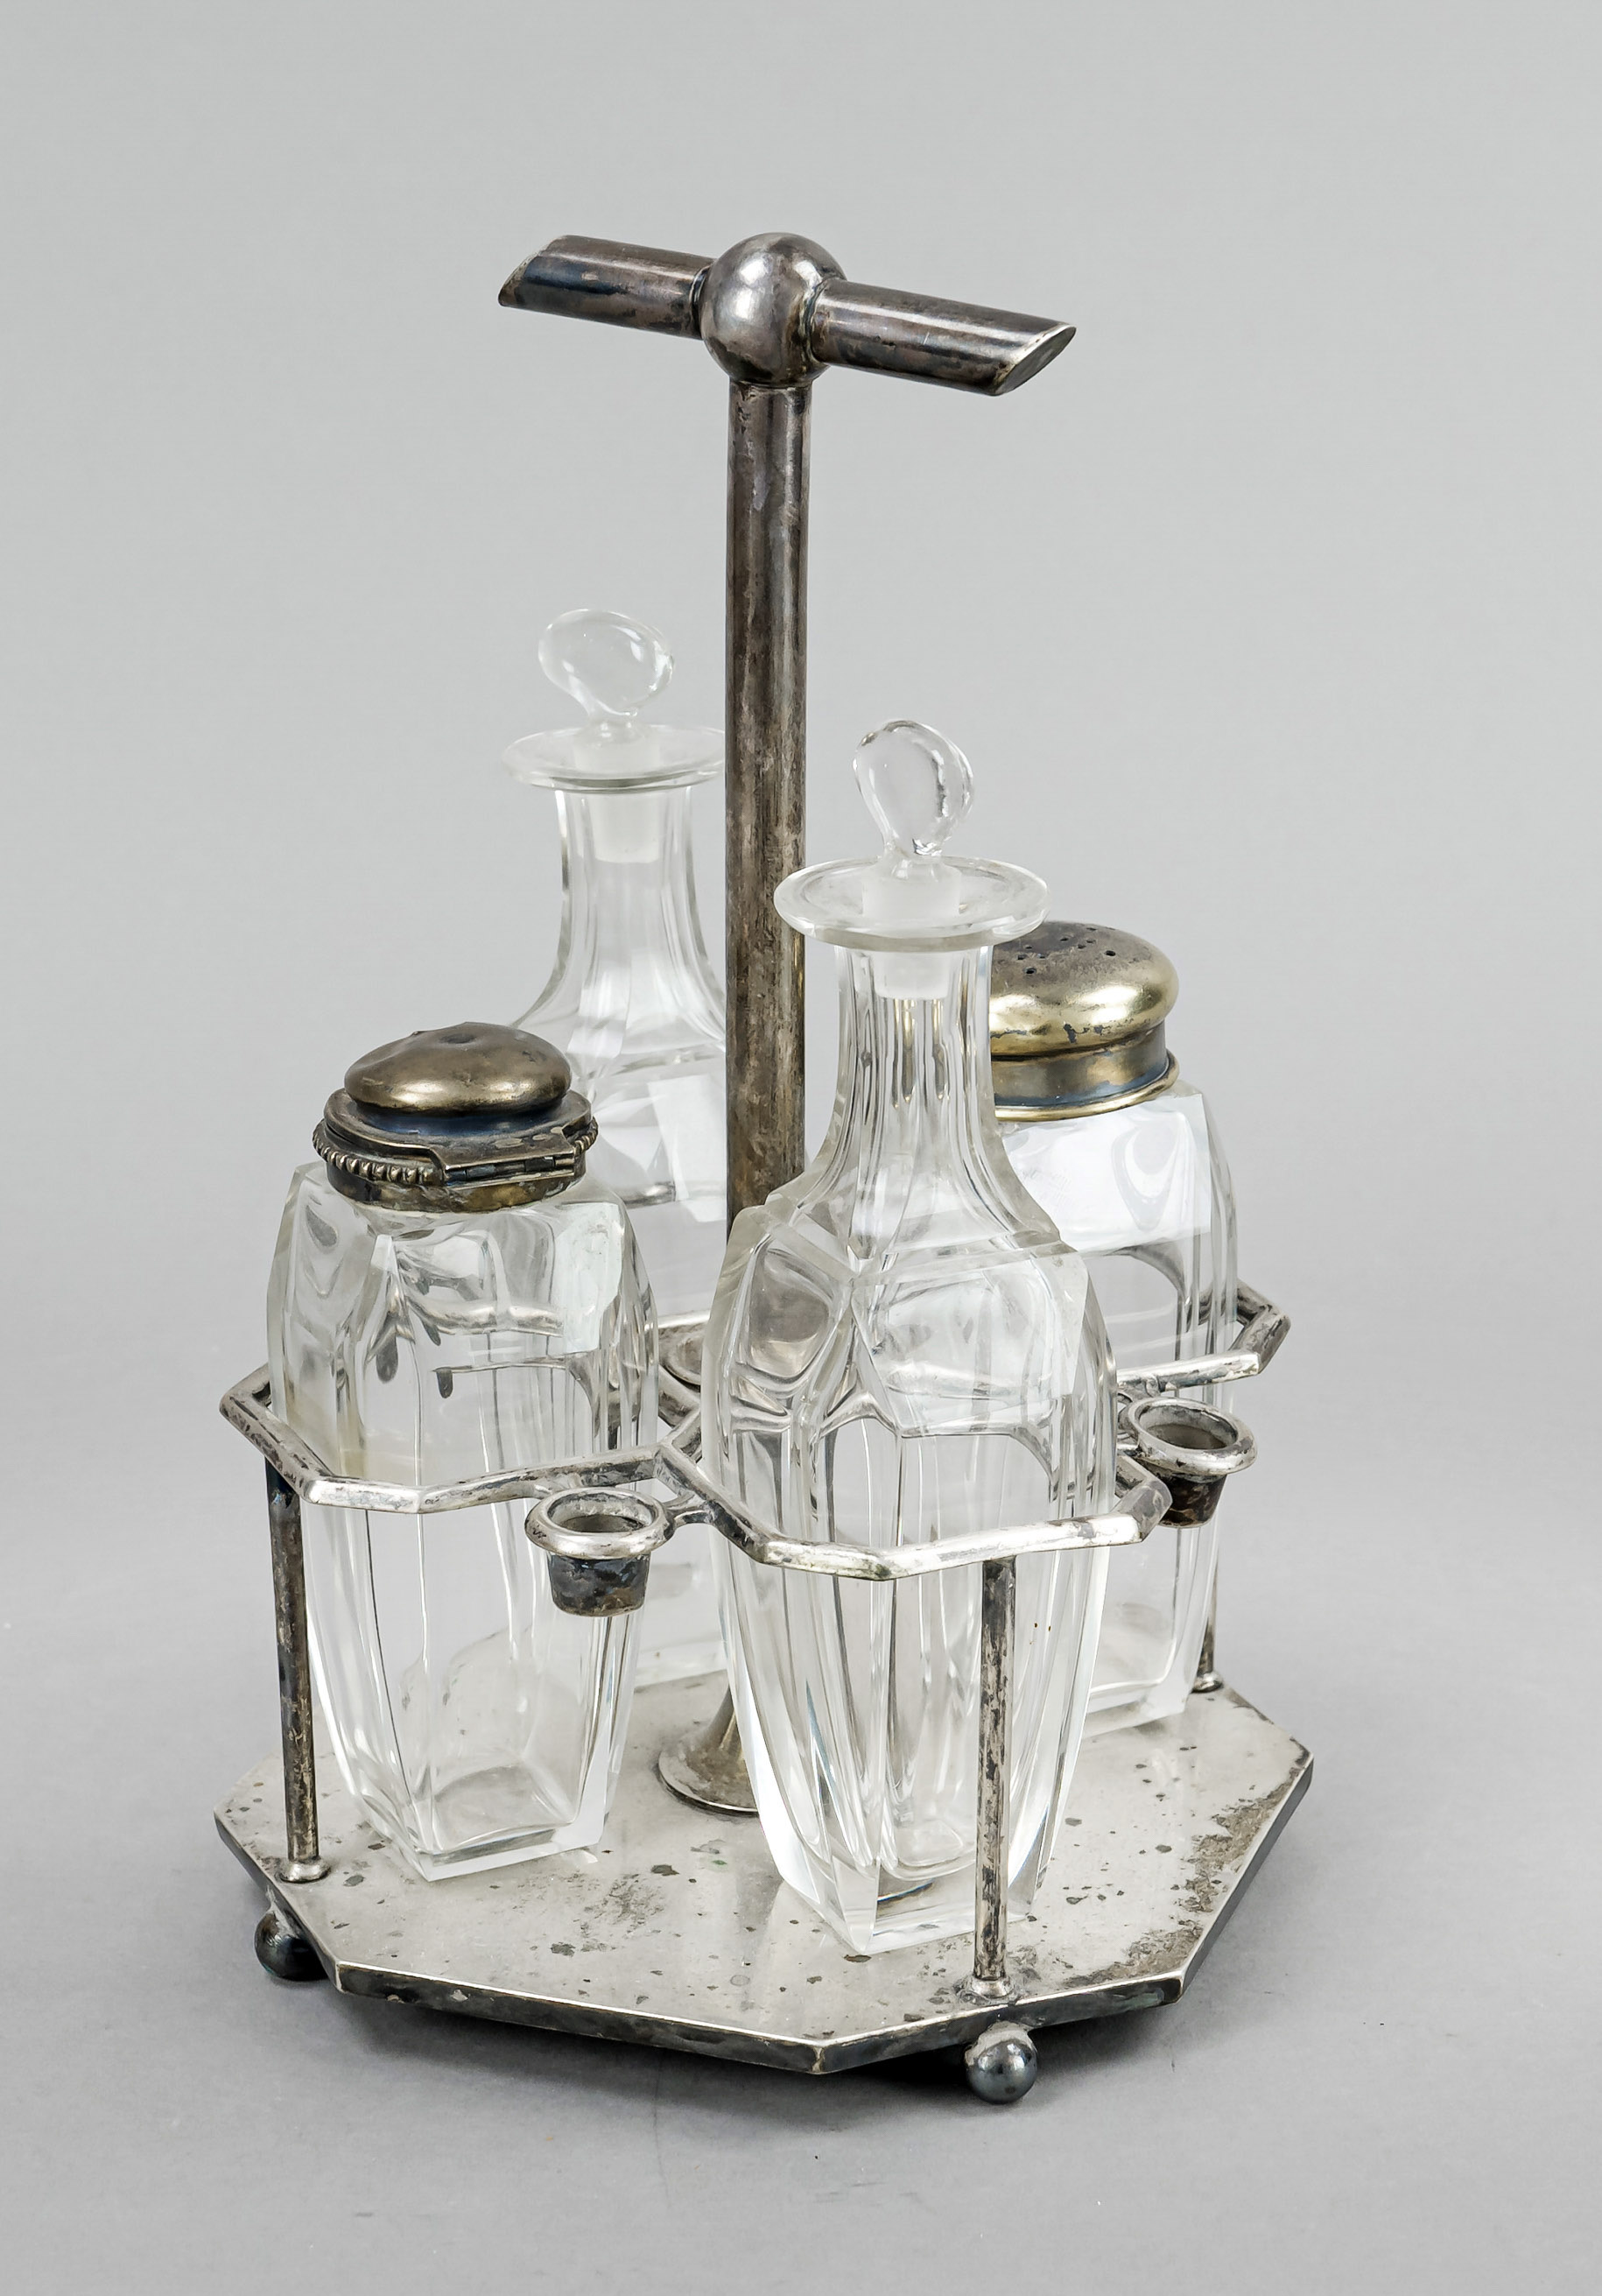 Cruet, German, 20th century, silver 800/000, 8-sided stand on 4 ball feet, central handle,